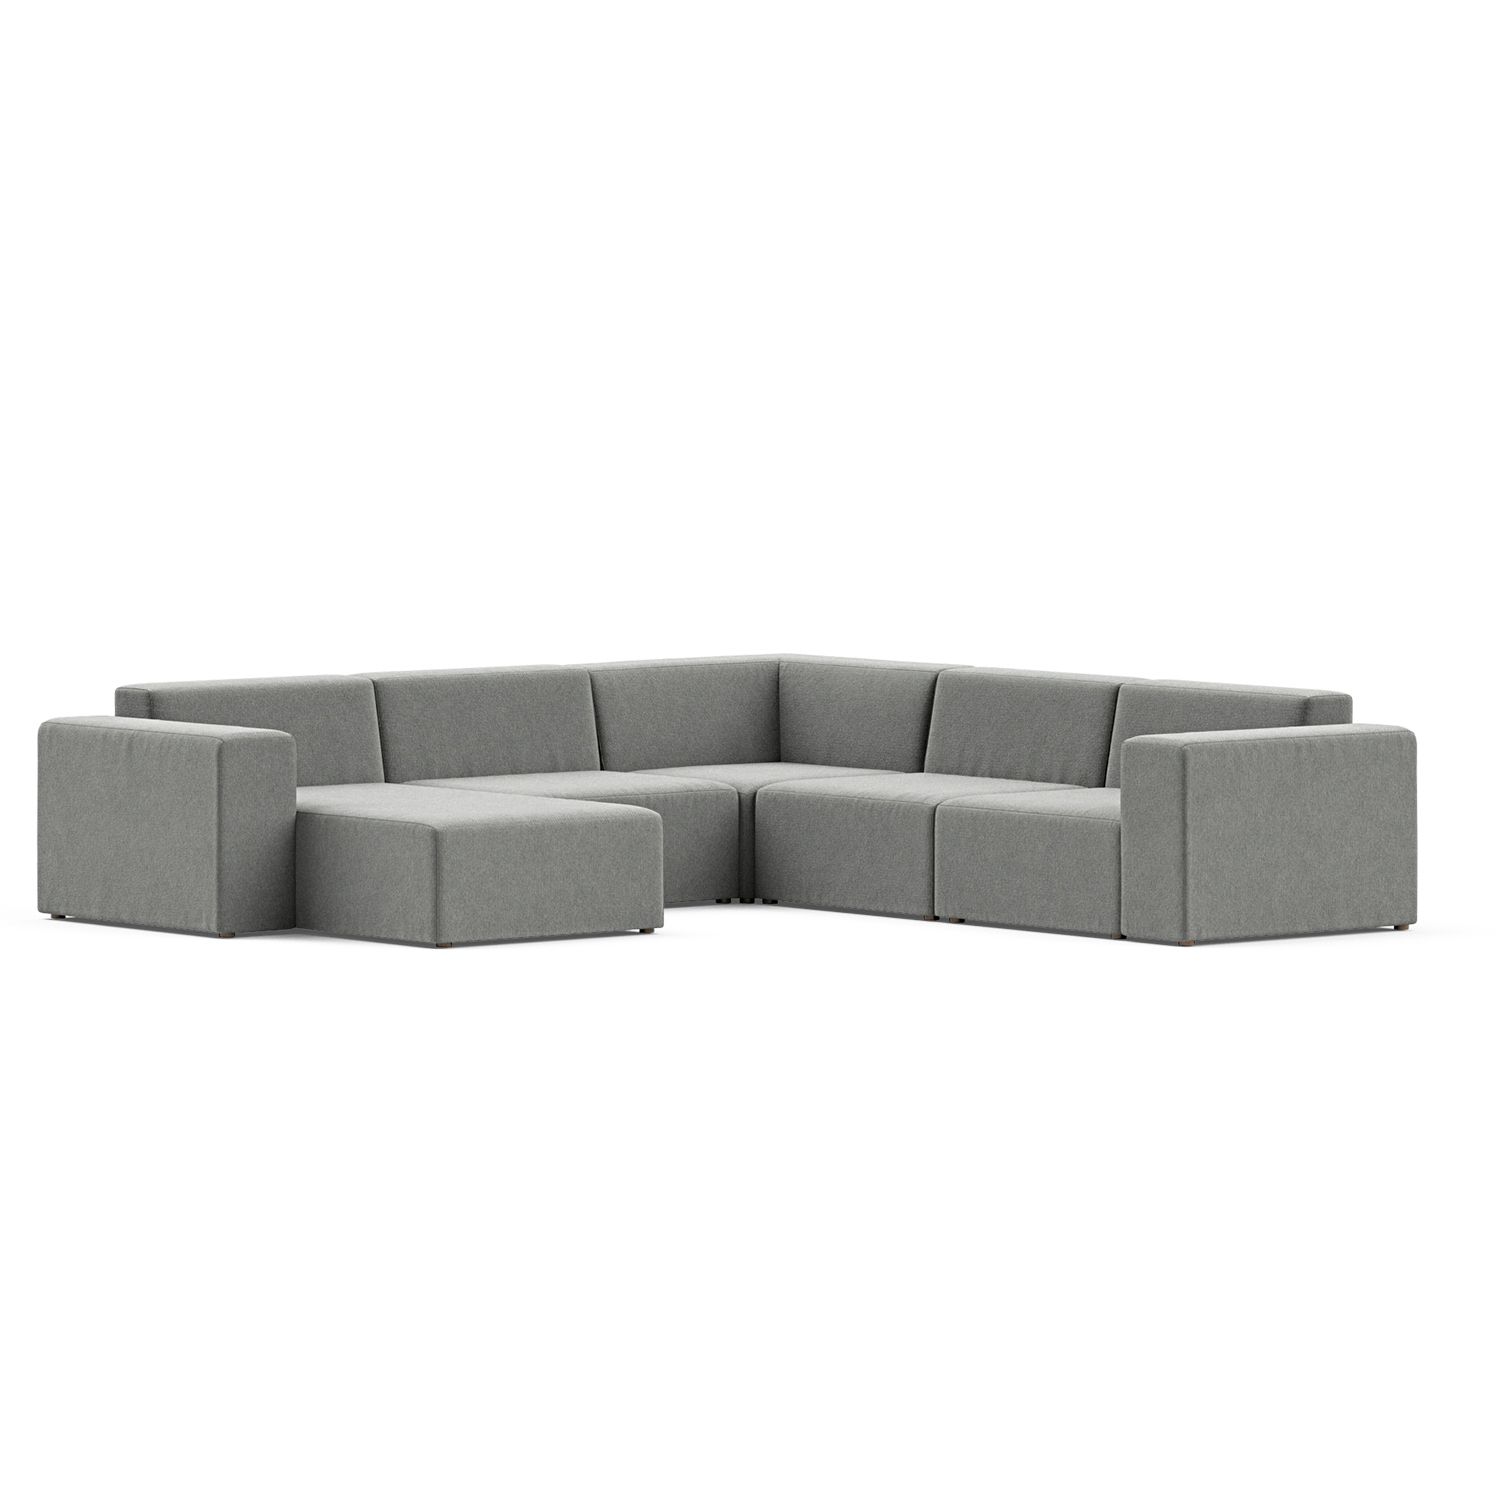 Best Sectional Sofas